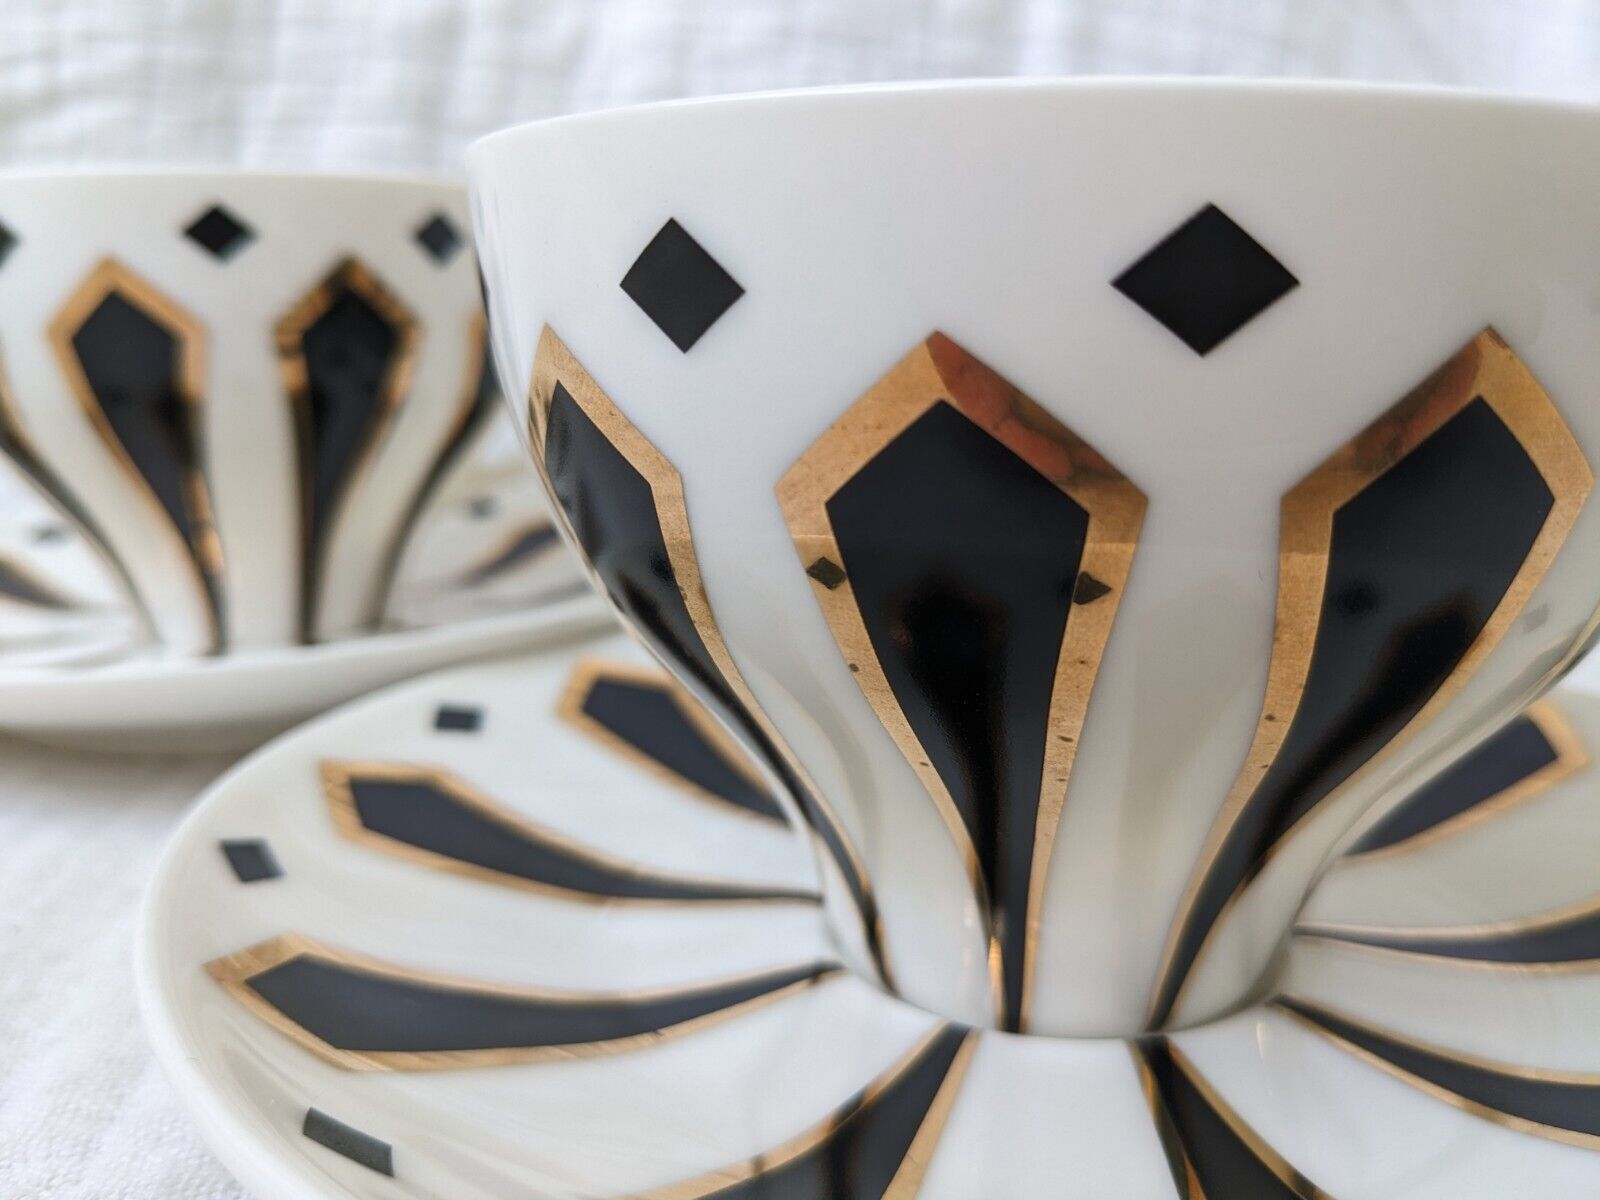 Set Of 2 Meritage Black And White Teacups And Saucer With Gold Trim Art Deco